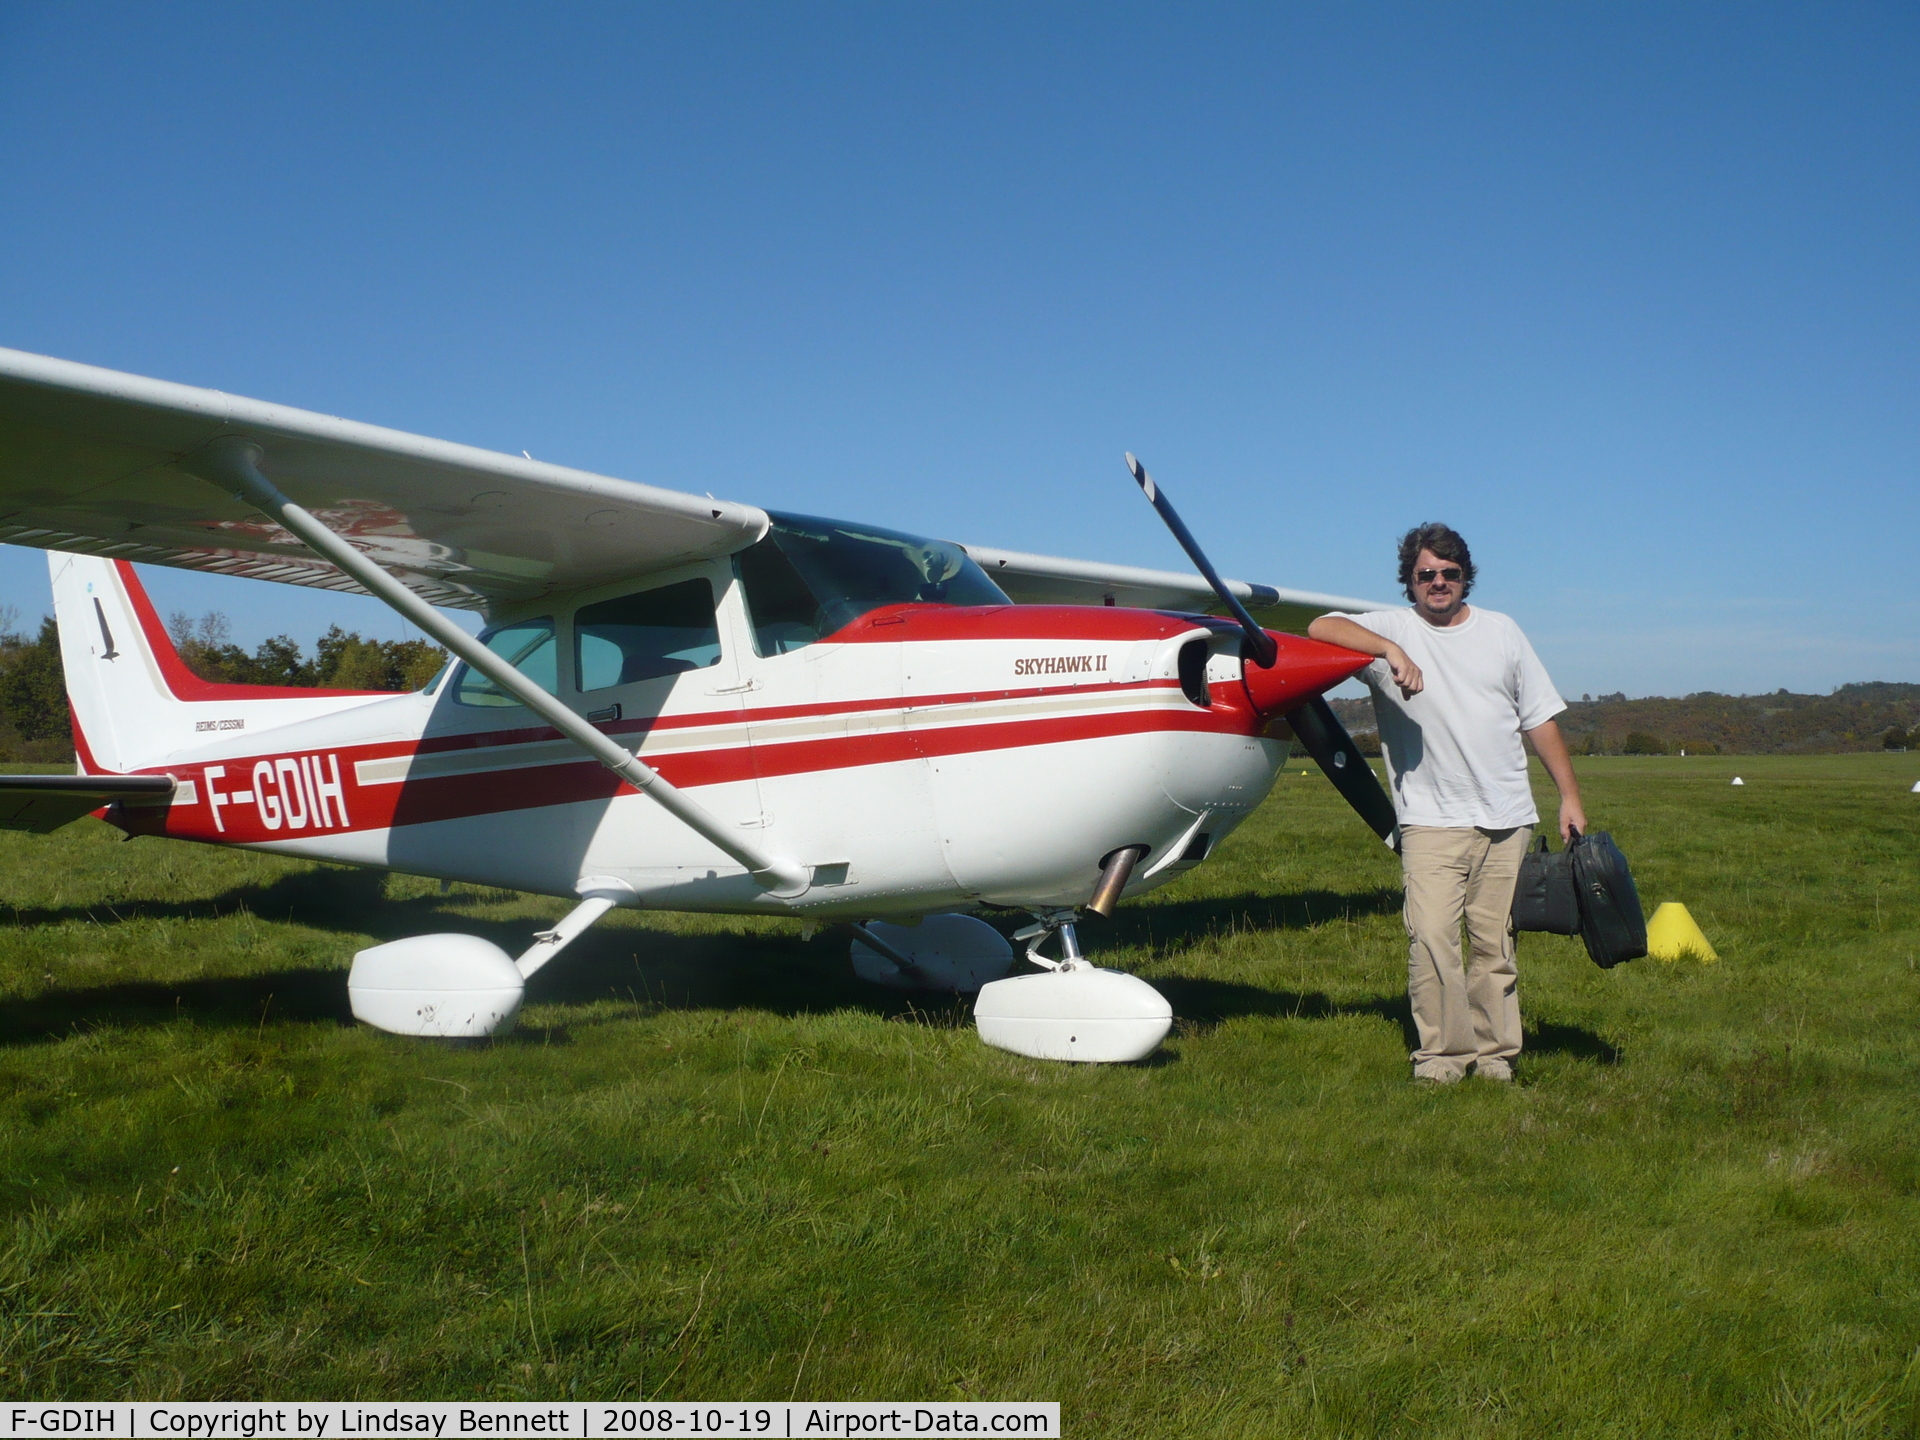 F-GDIH, Reims F172P C/N 2138, F-GDIH with pilot Pete Bennett in front of club house at Aero Club de la Creuse near Gueret in the Limousin region of France